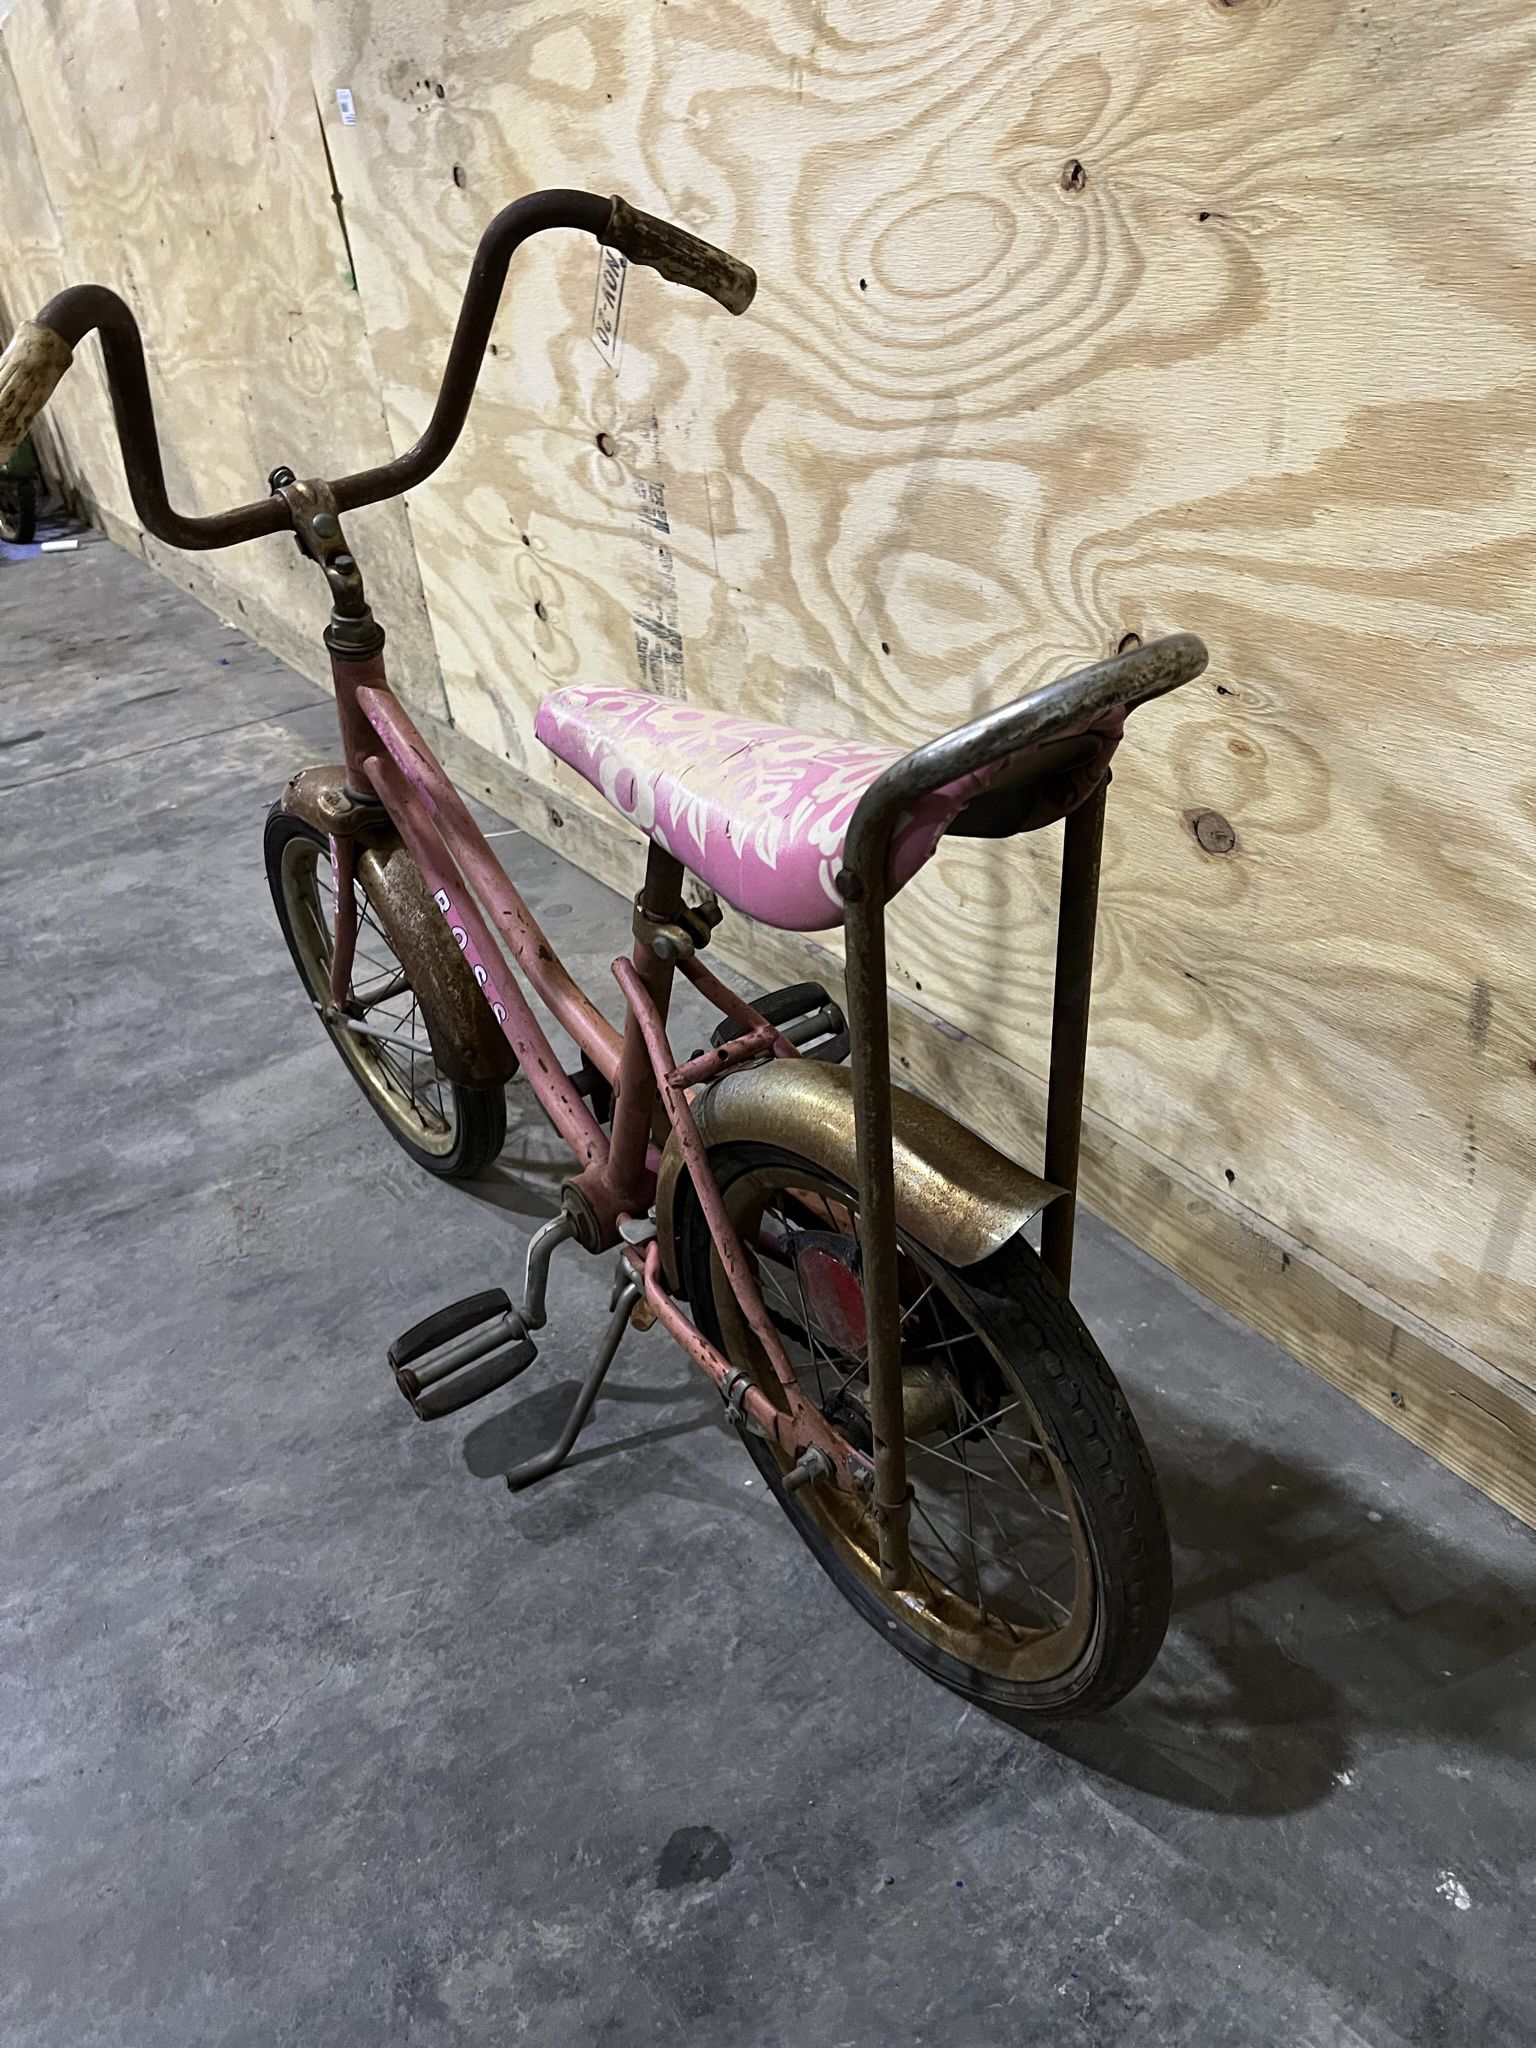 Details about   Vintage Ross Polo Pink Bike w/ Floral Banana Seat 